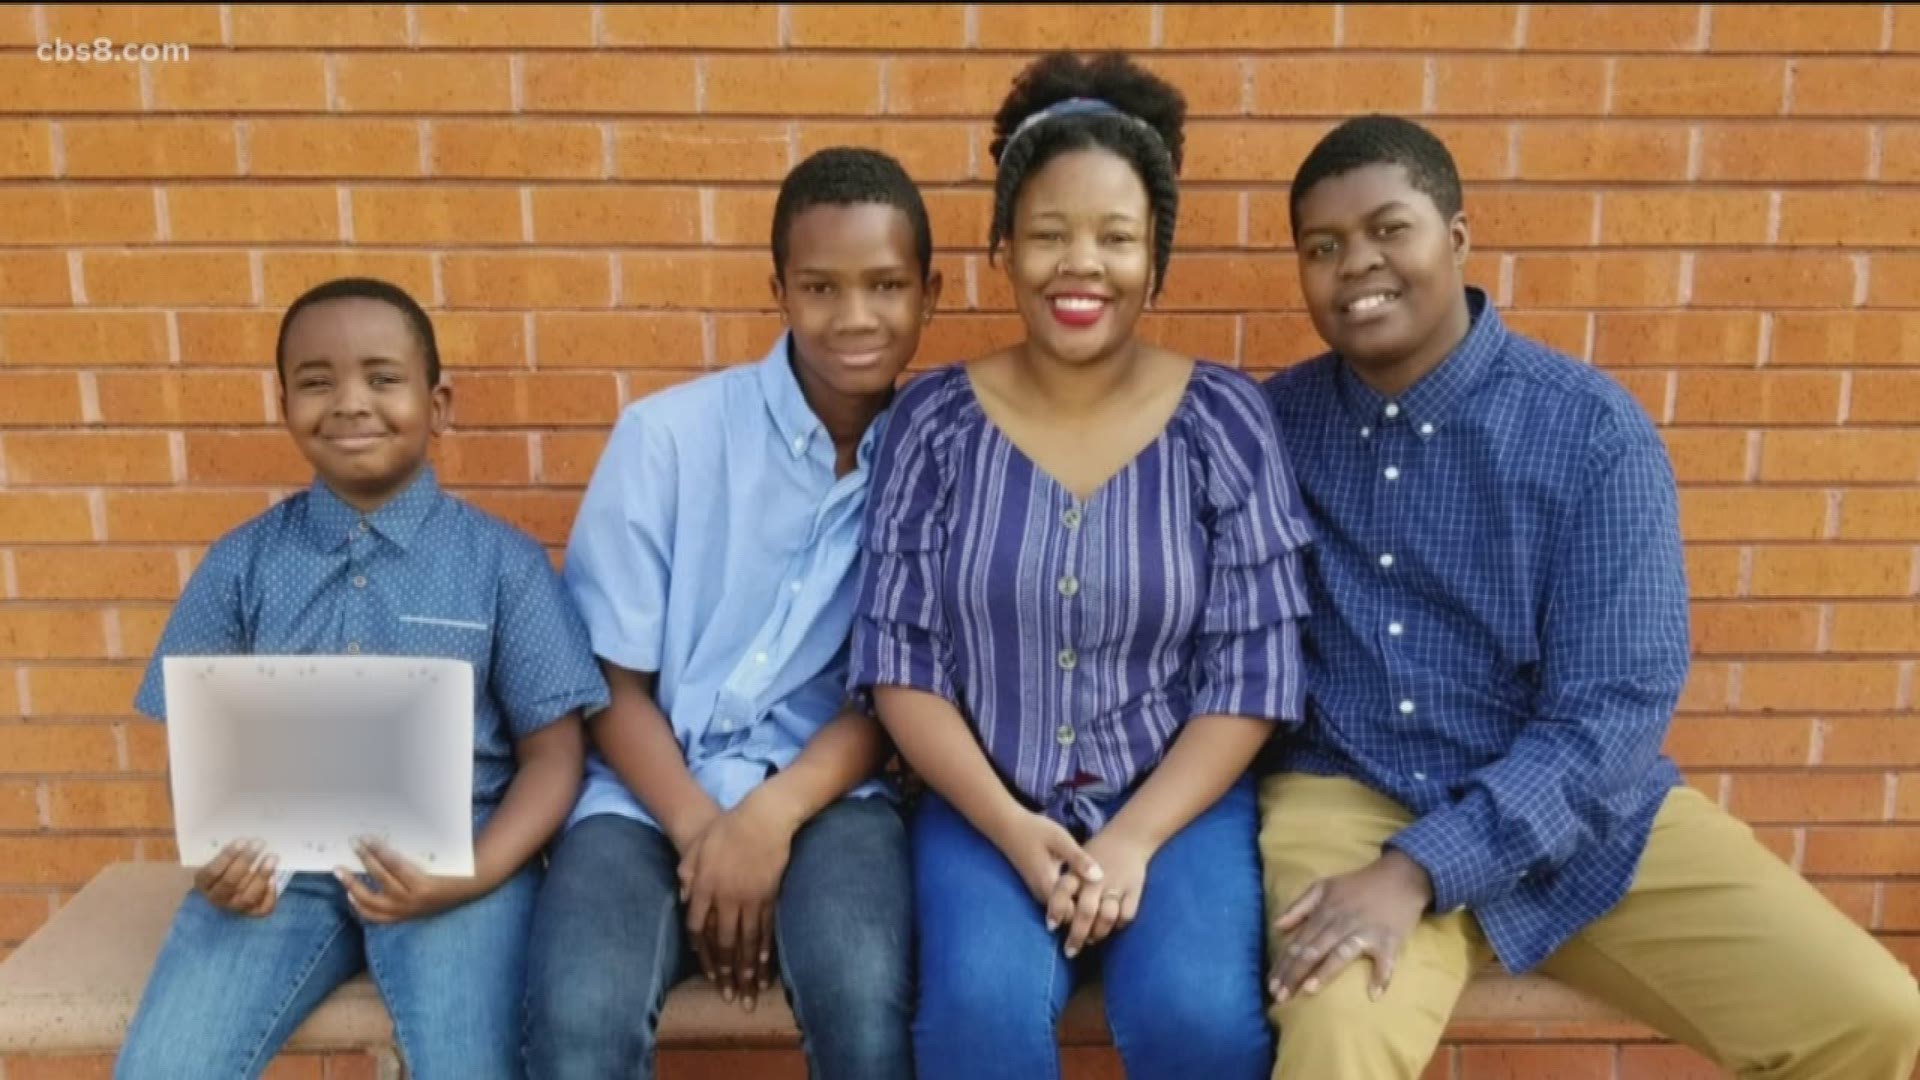 "Hopefully all the other kids out there get a family to be as happy as I am," said 10-year-old Will. He and his brother Elijah found their forever home 2 years ago.